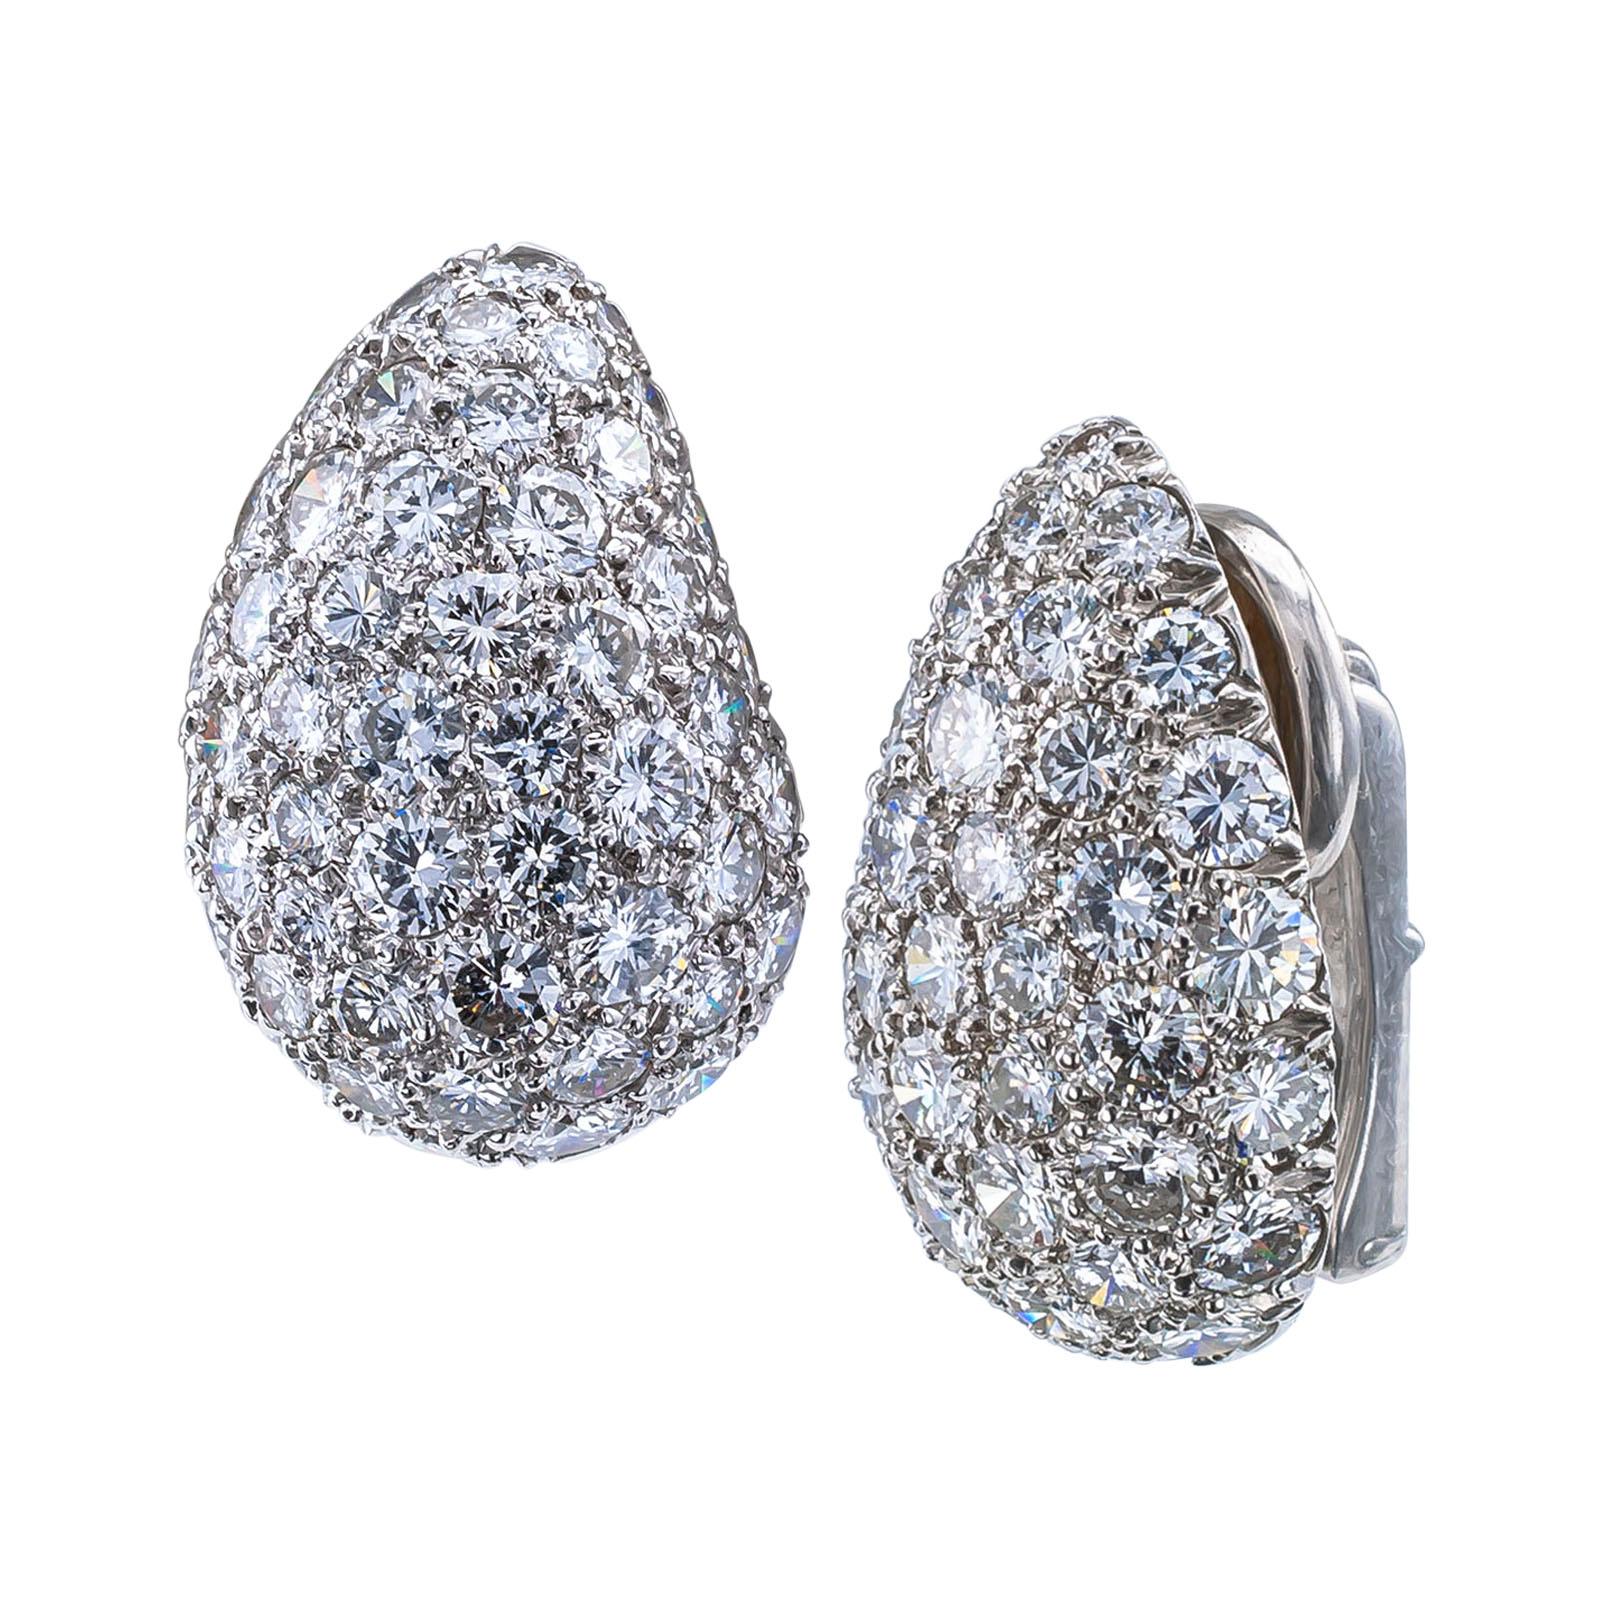 Diamond platinum and white gold ear clips circa 1950.

DETAILS:
Half-domed diamond pave platinum and white gold ear clips.
DIAMONDS: one hundred round brilliant-cut diamonds totaling approximately 8.00 carats, approximately G – H color and VS